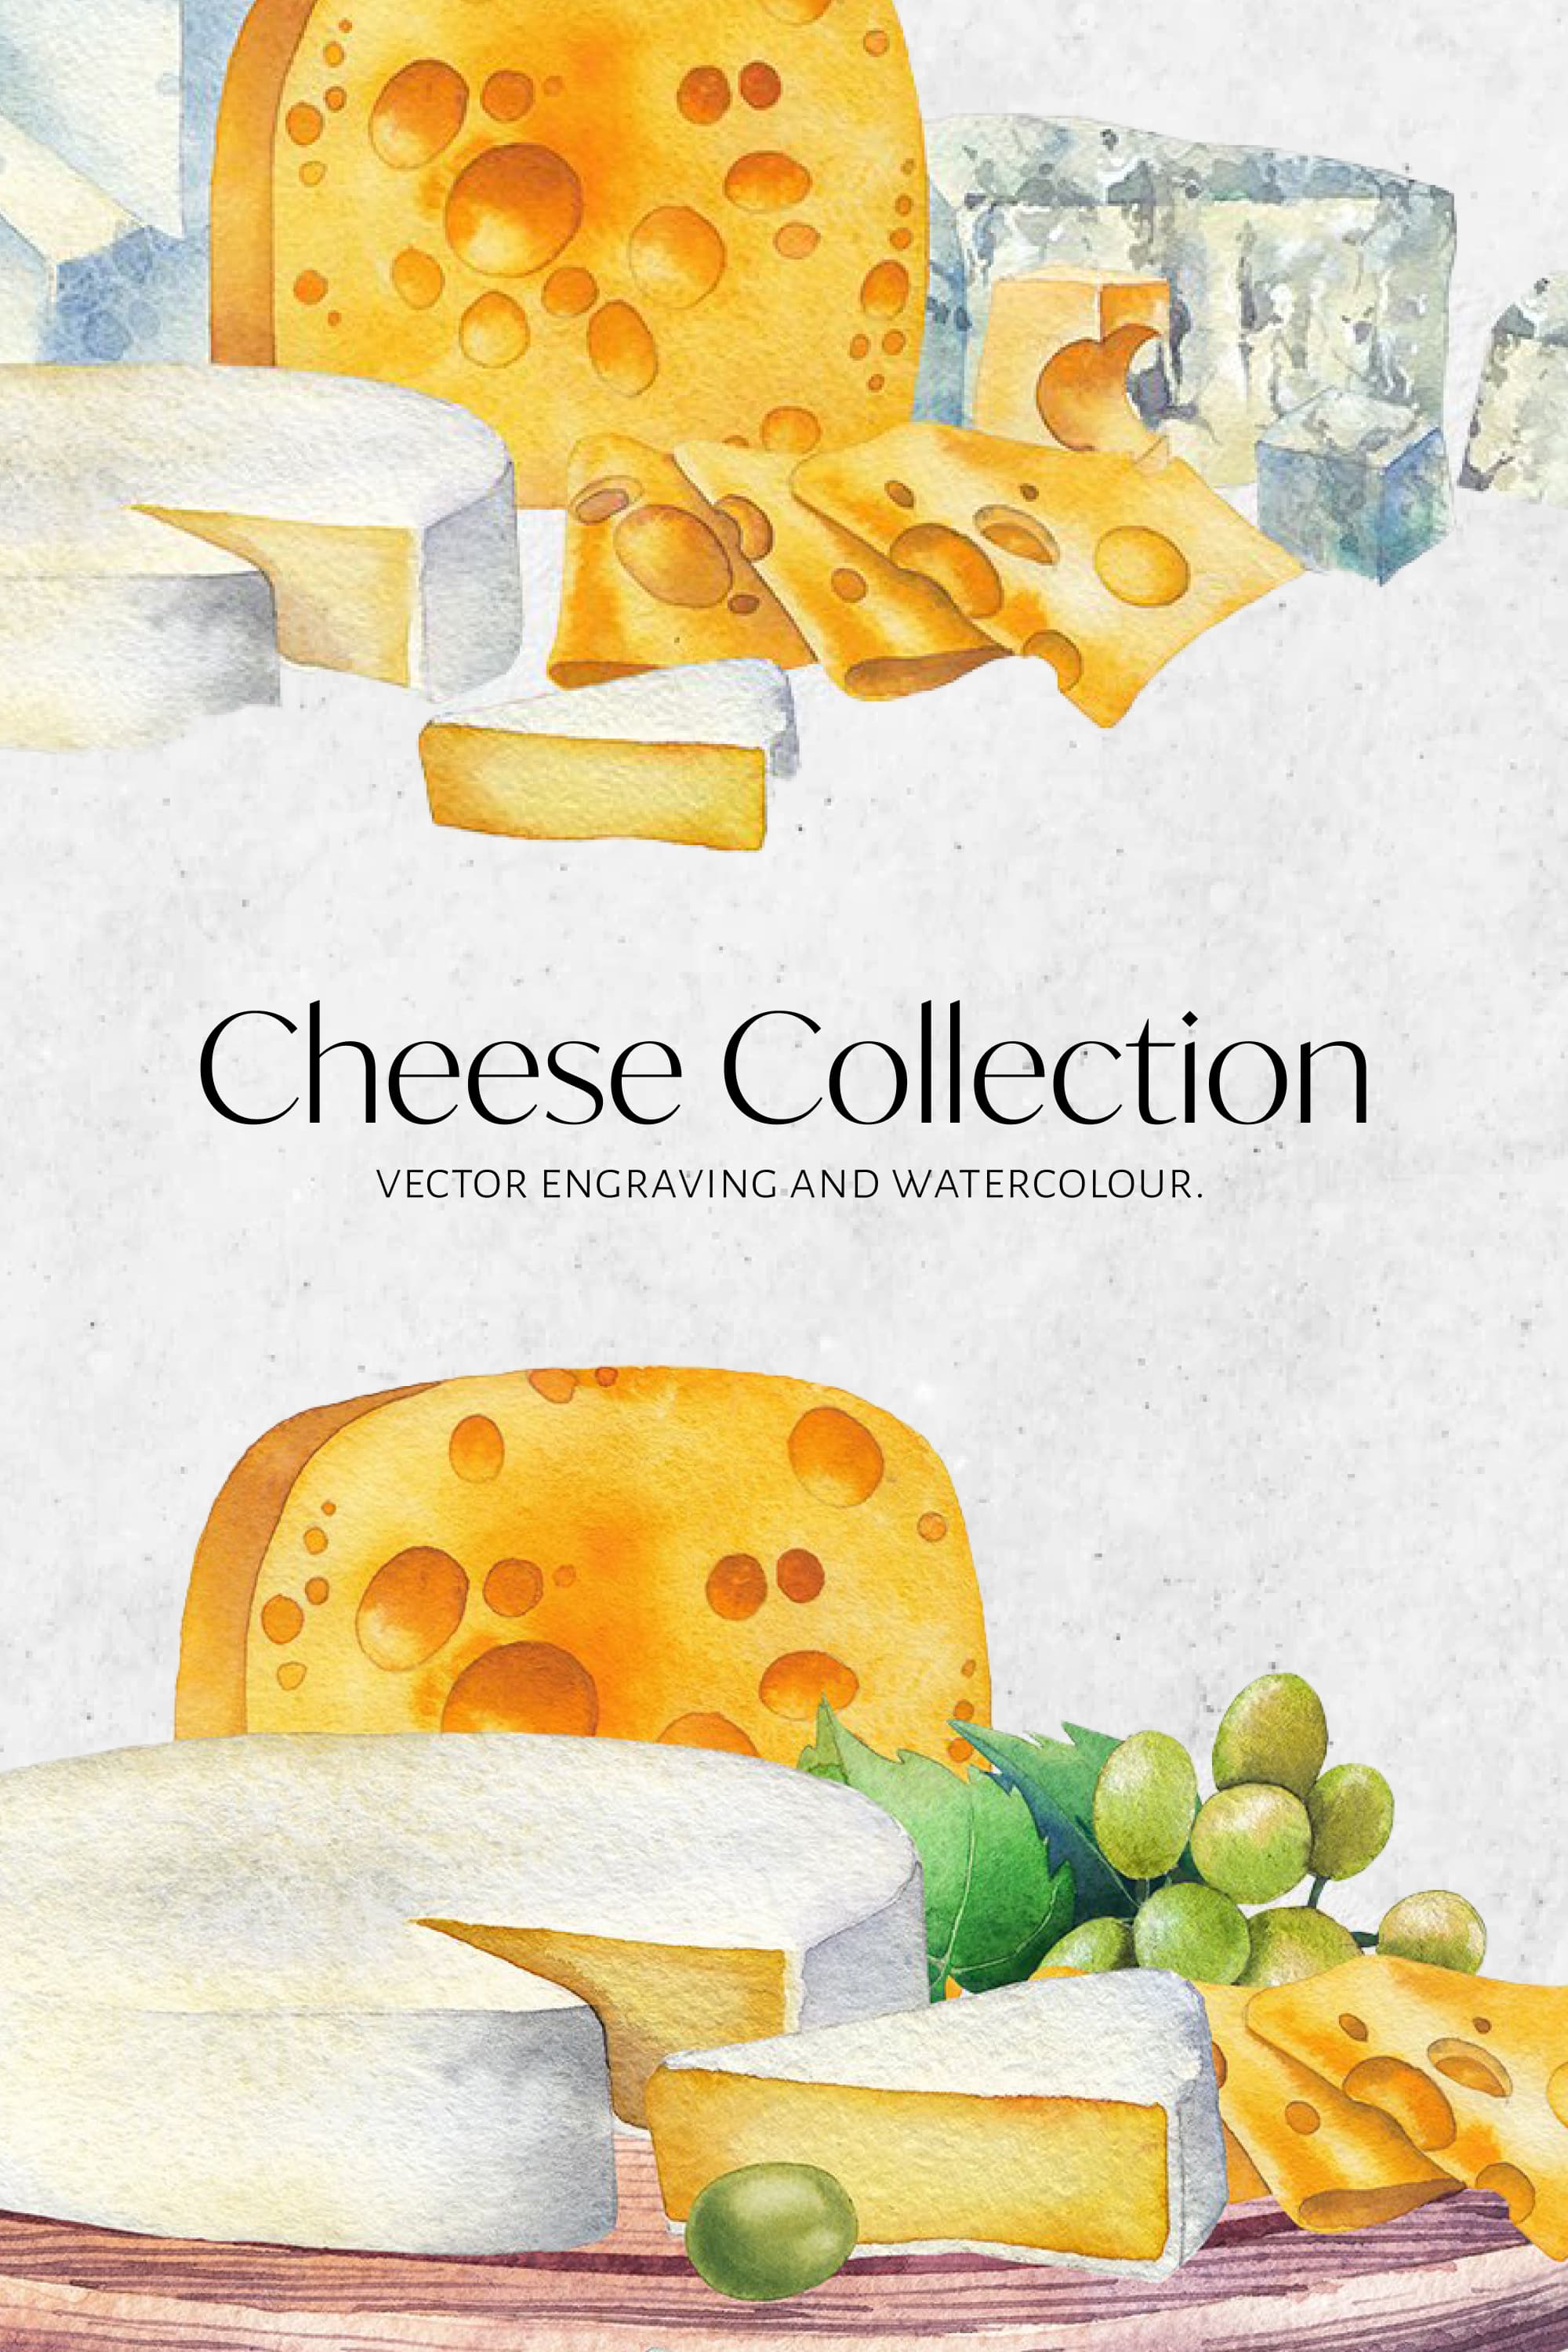 Collection of colorful images of hard cheeses.